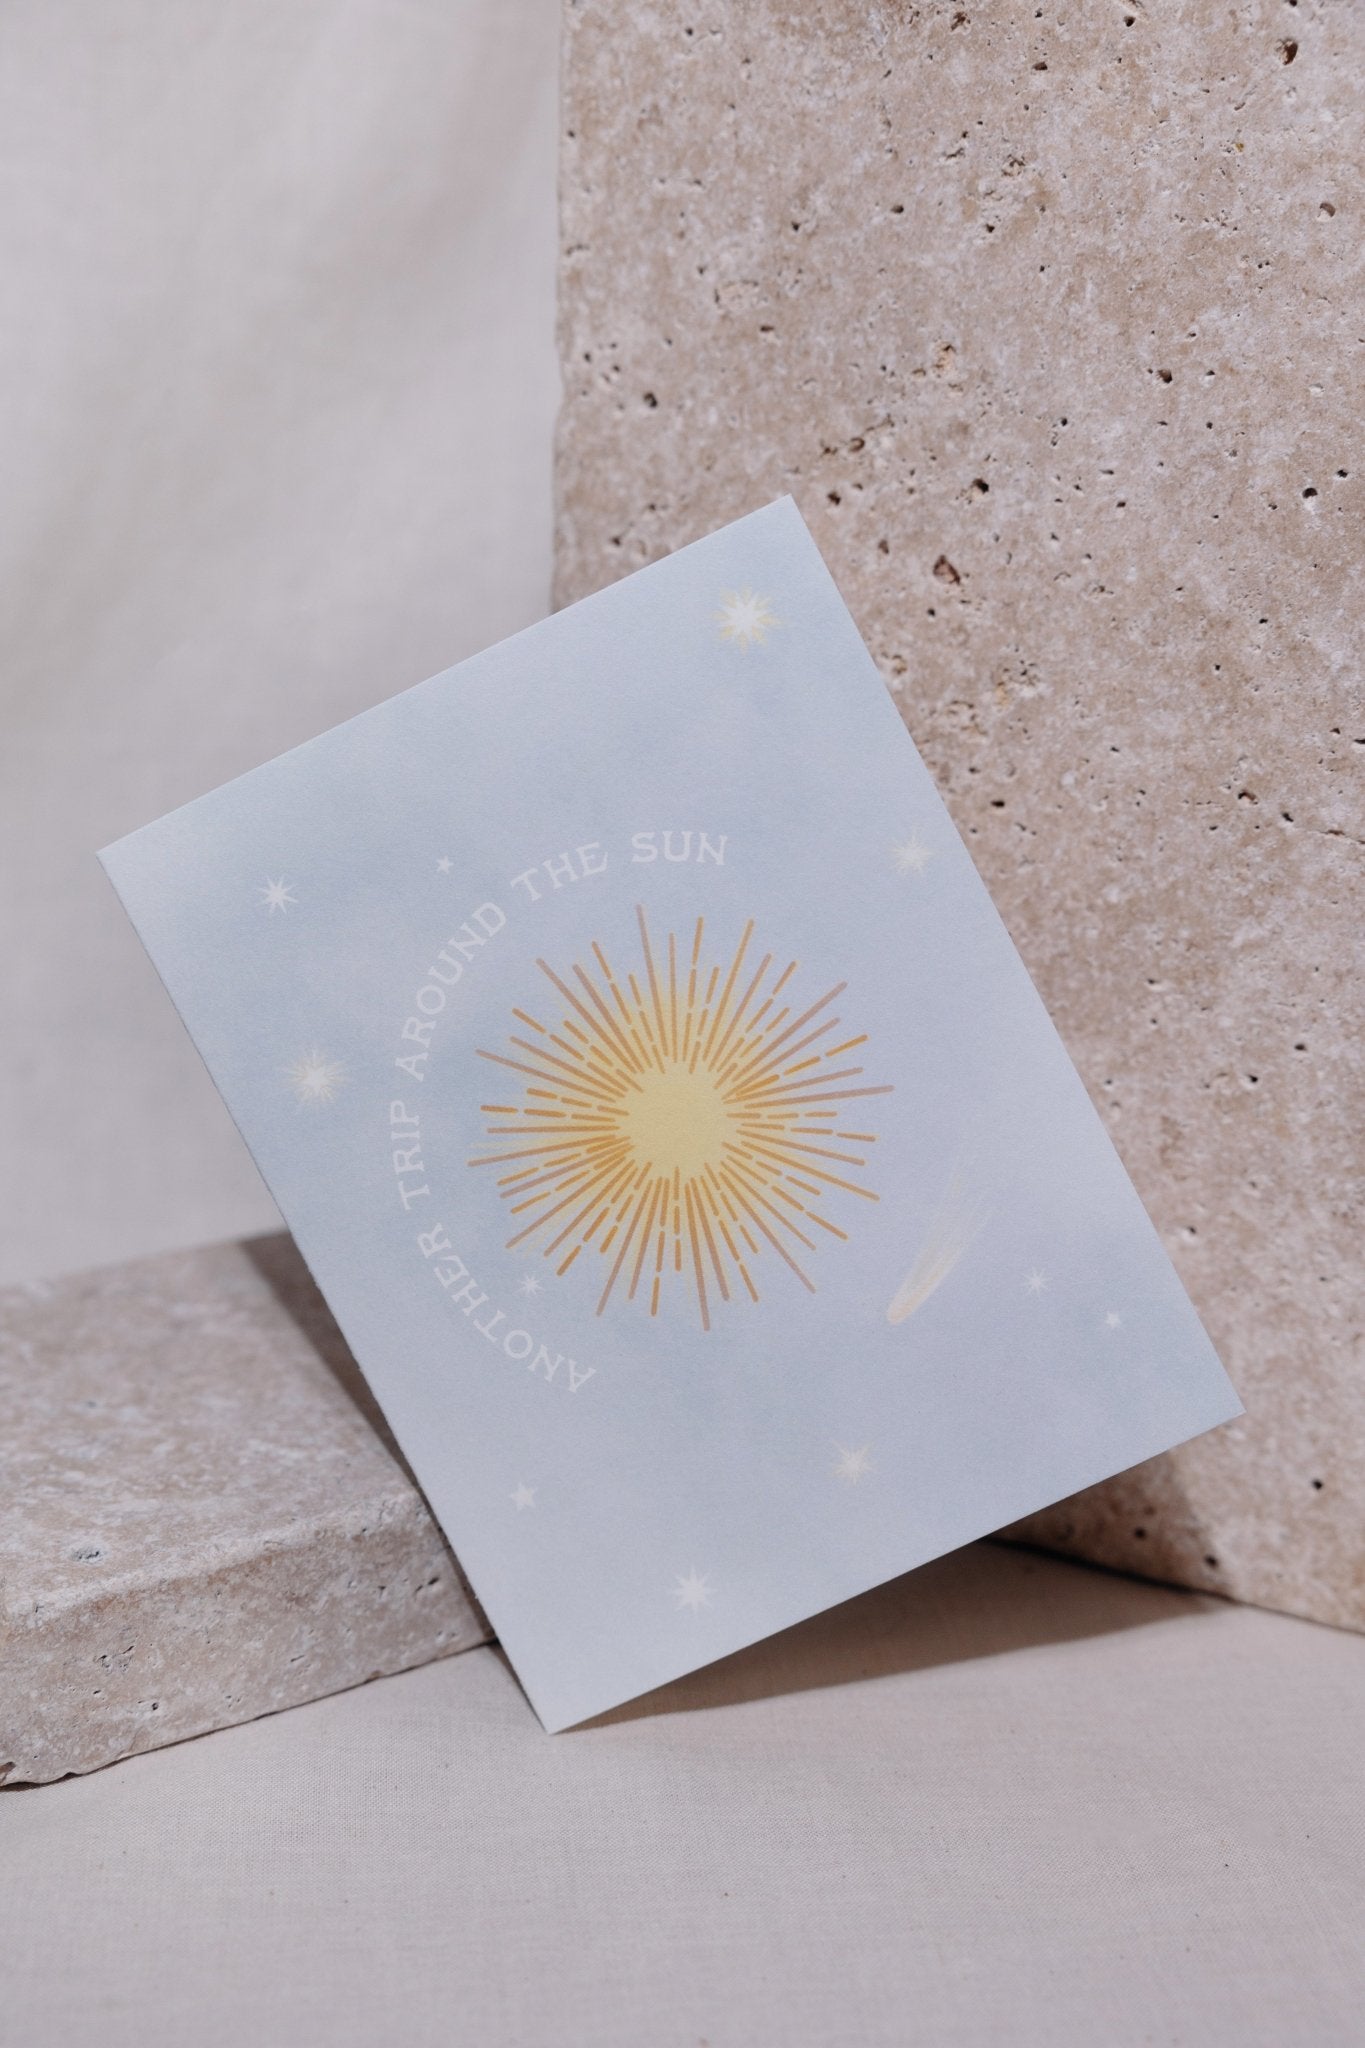 Greeting card with a place blue background, stars, and the words &quot;Another Trip Around the Sun&quot; circling around a yellow sun. Card is propped up on a beige background and is leaning at an angle against a light gray stone.